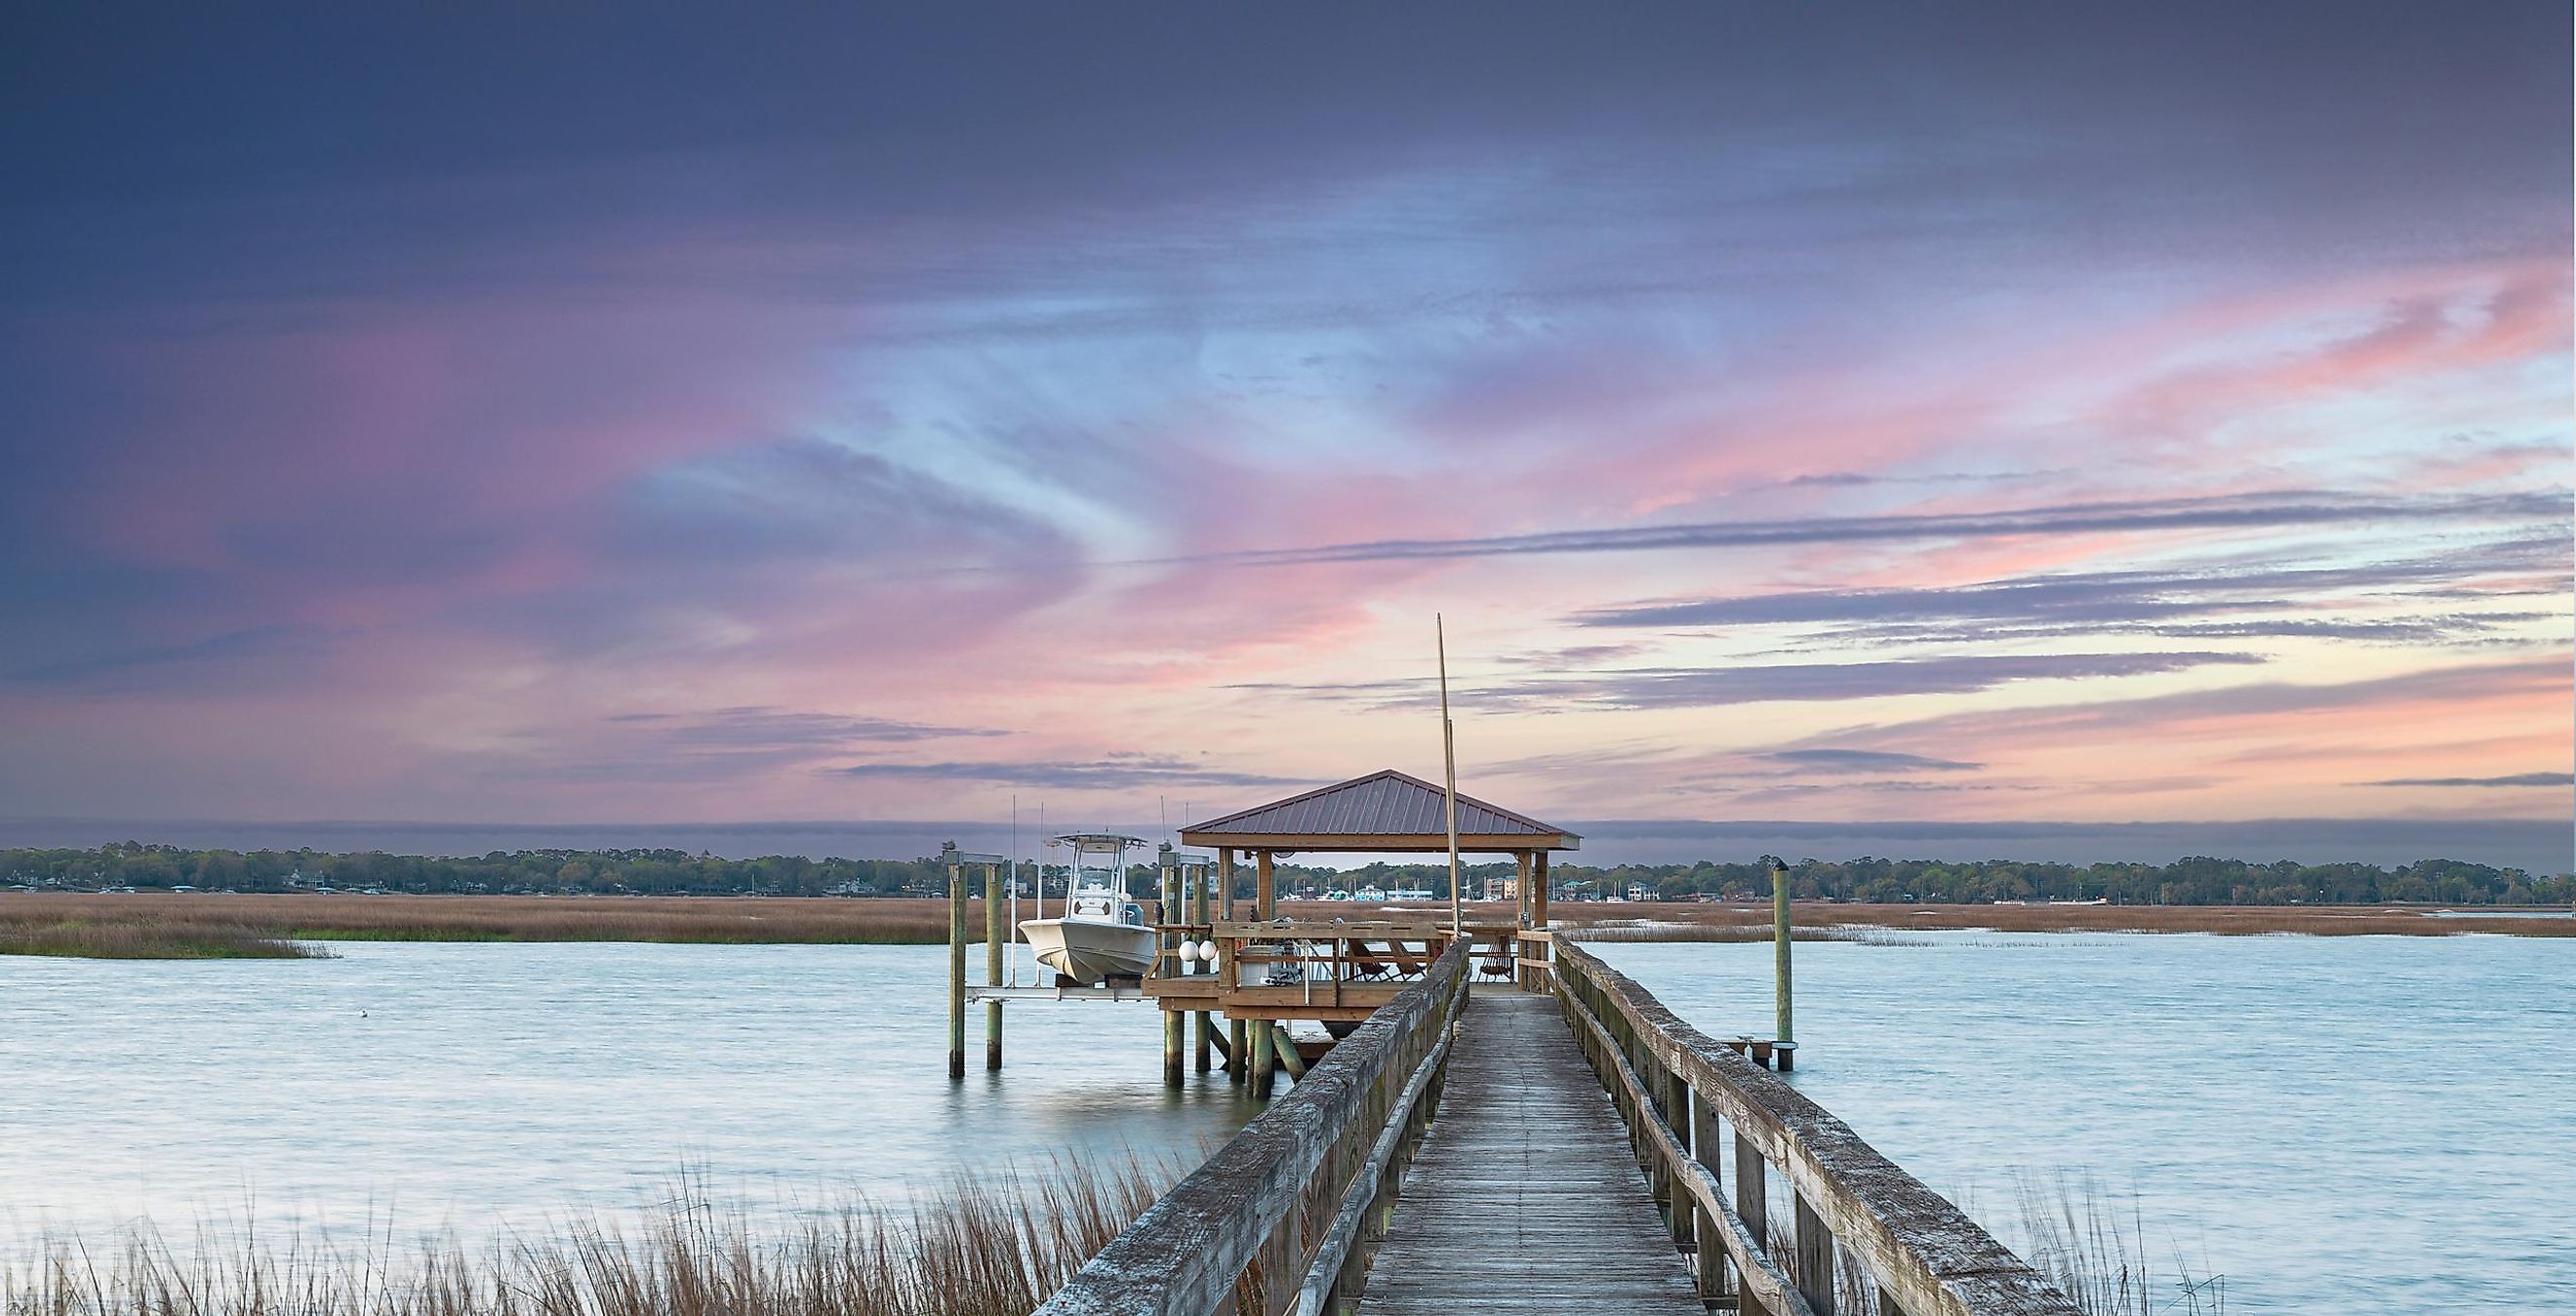 View from the dock of a boathouse with a pink sky in Beaufort, South Carolina.